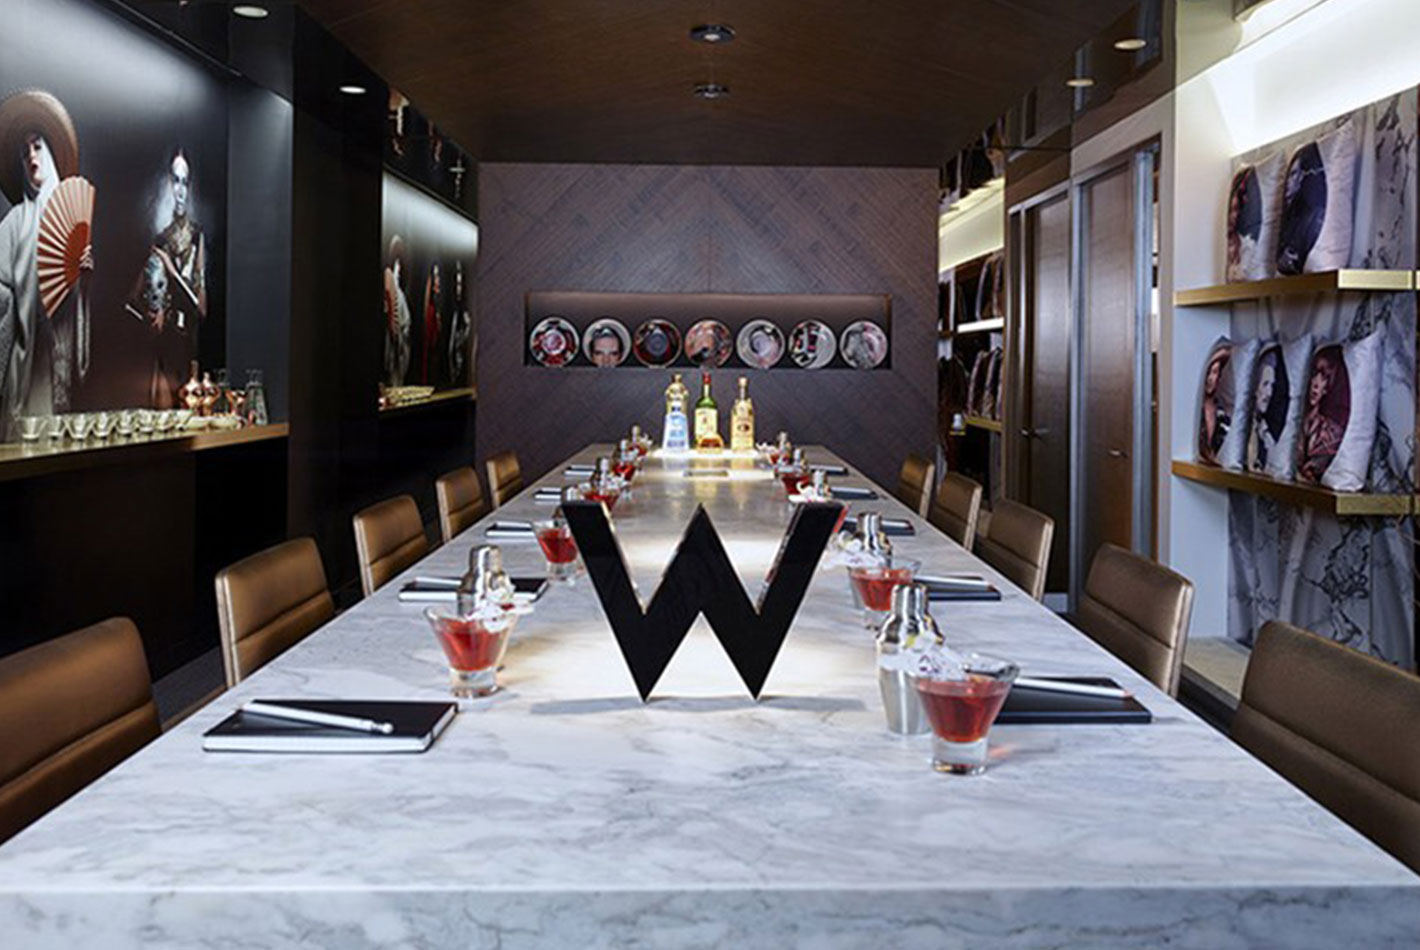 The W Hotel conference room at Starwood Design Studio has a white marble waterfall table and sleek desk chairs.